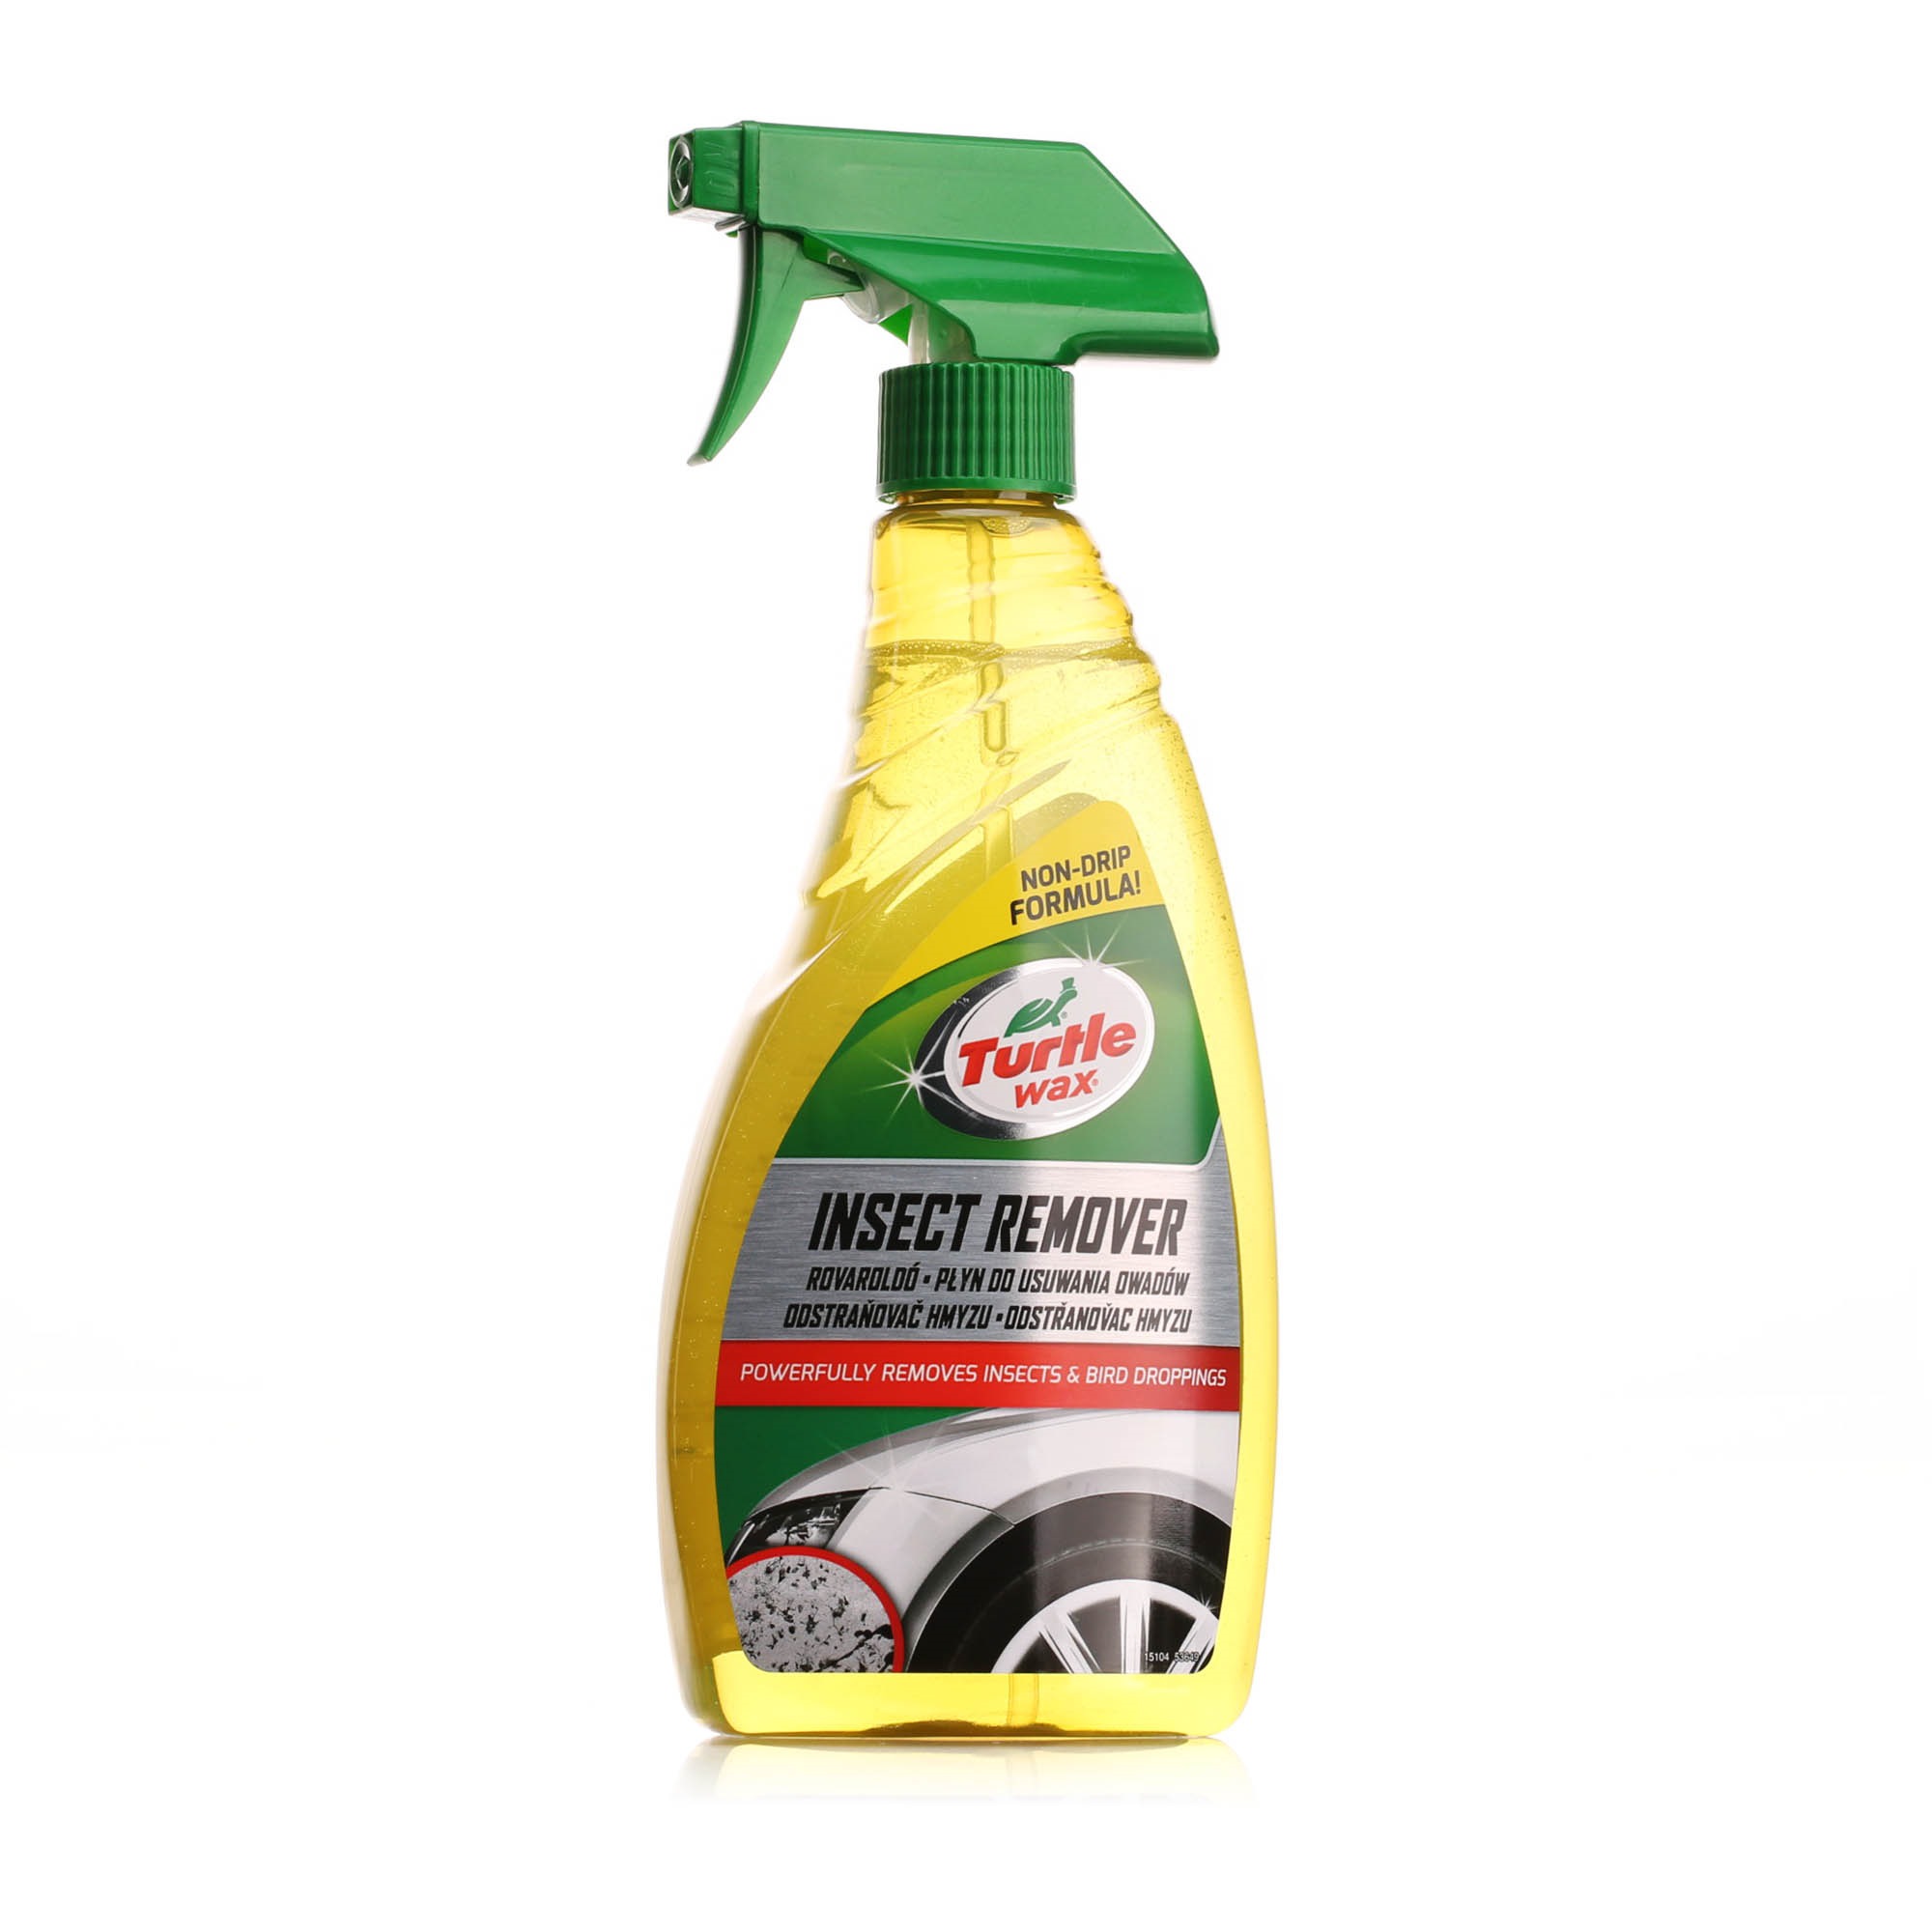 TURTLEWAX Insect Remover 70171